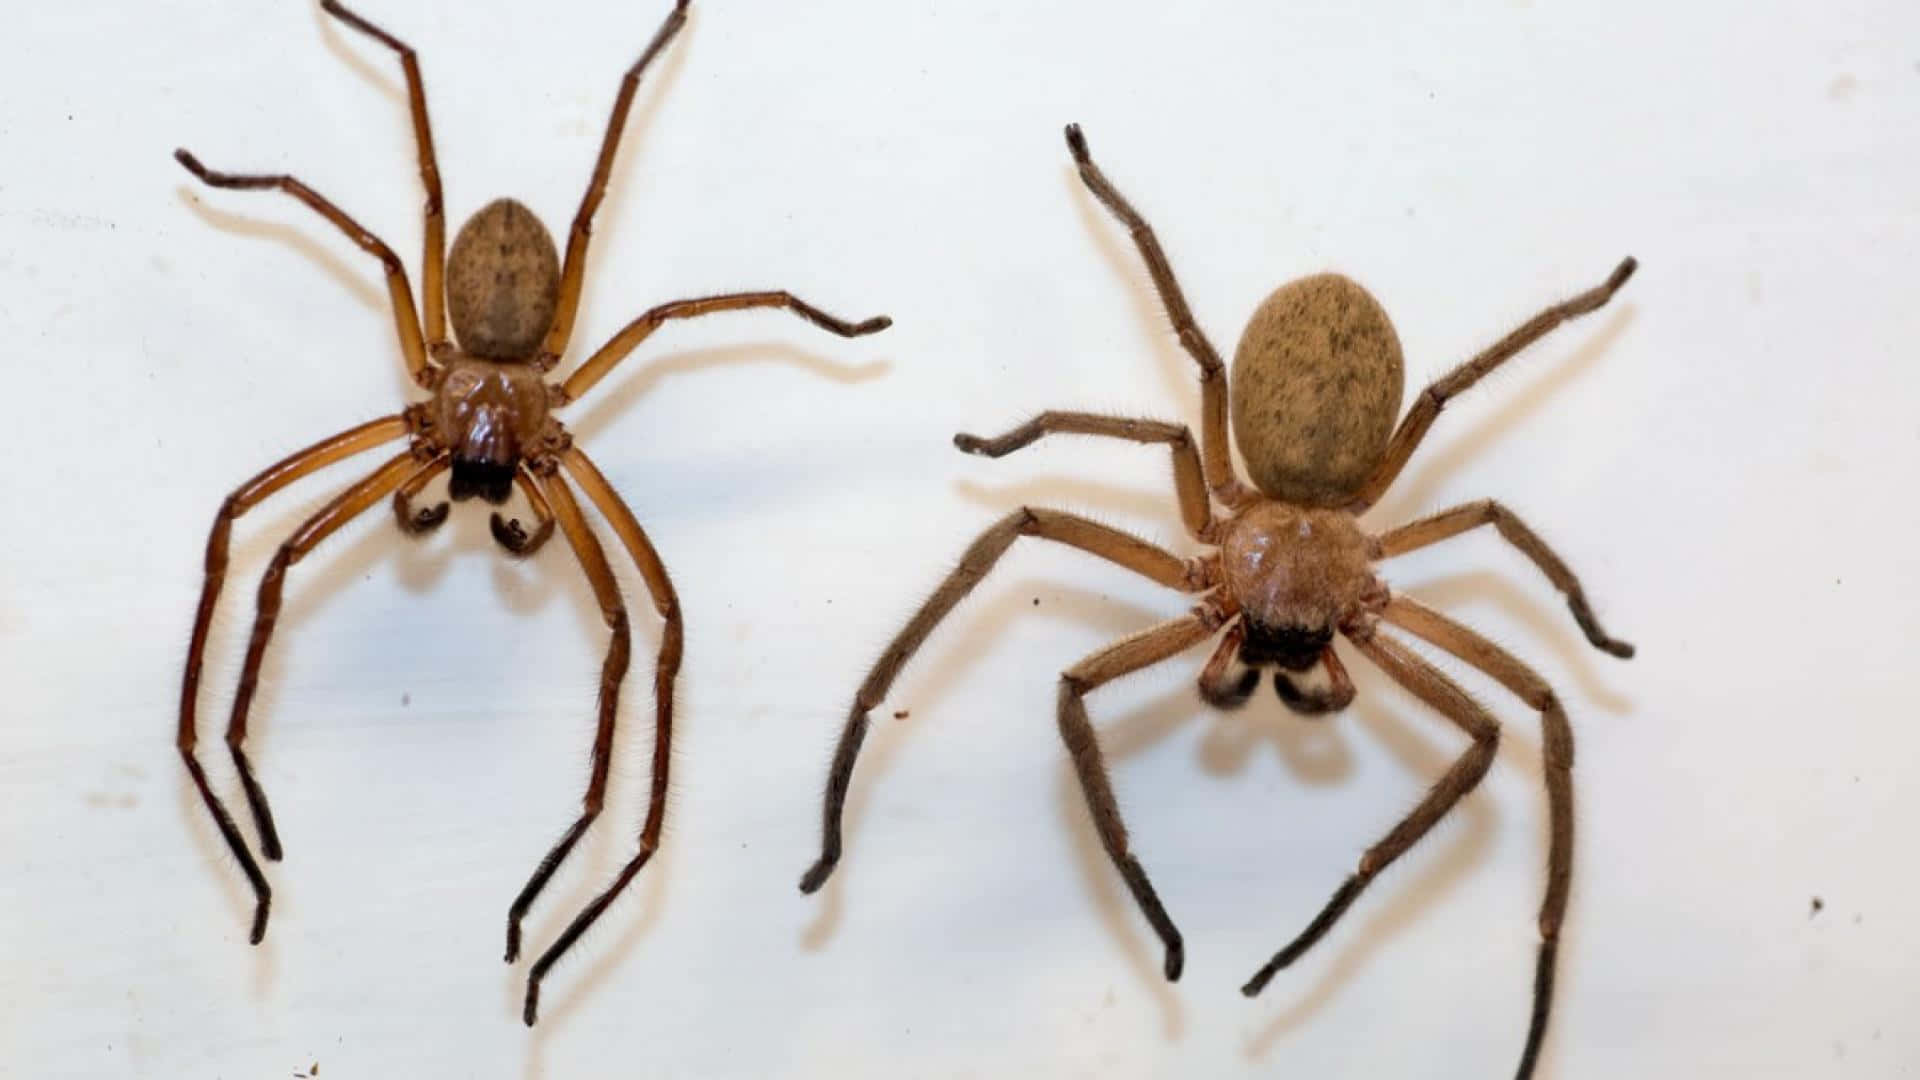 A close-up view of a Brown Recluse Spider on a web Wallpaper